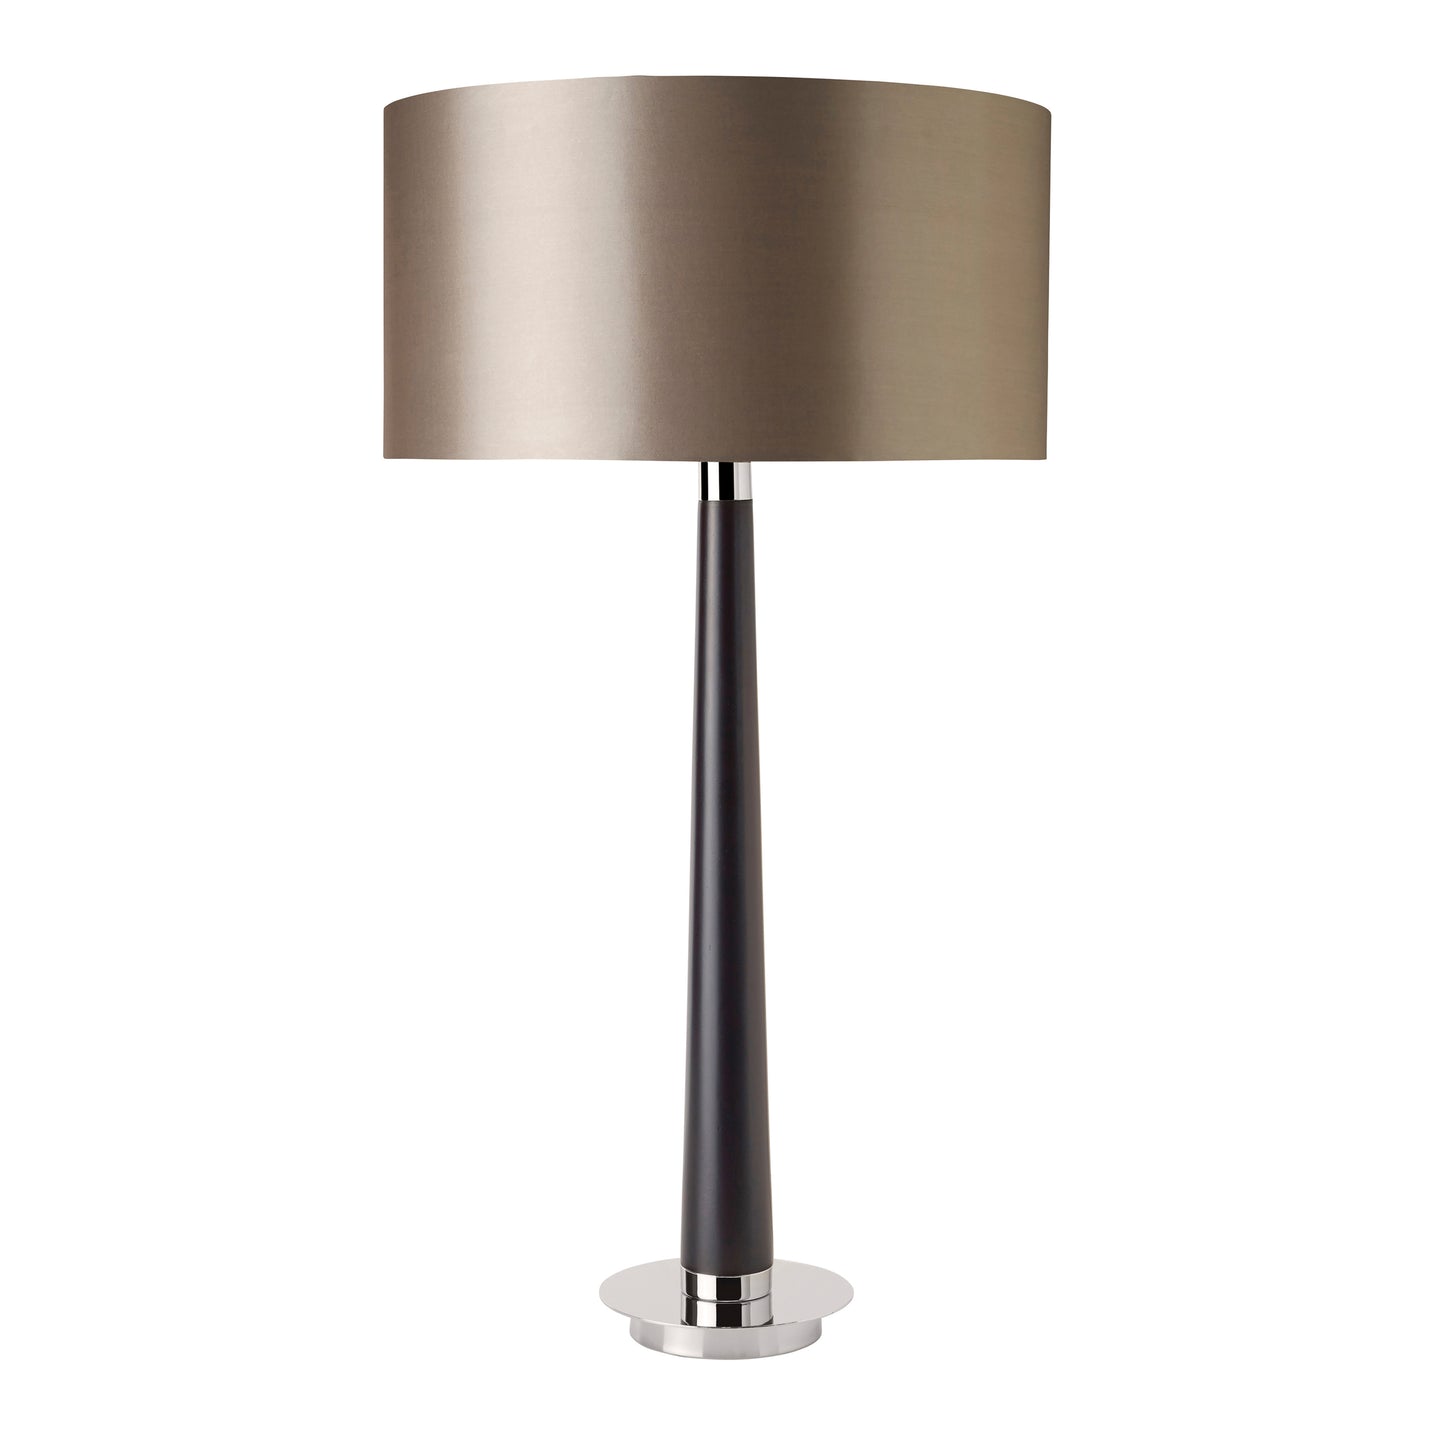 A Kingswear Table Lamp from Kikiathome.co.uk perfect for interior decor.